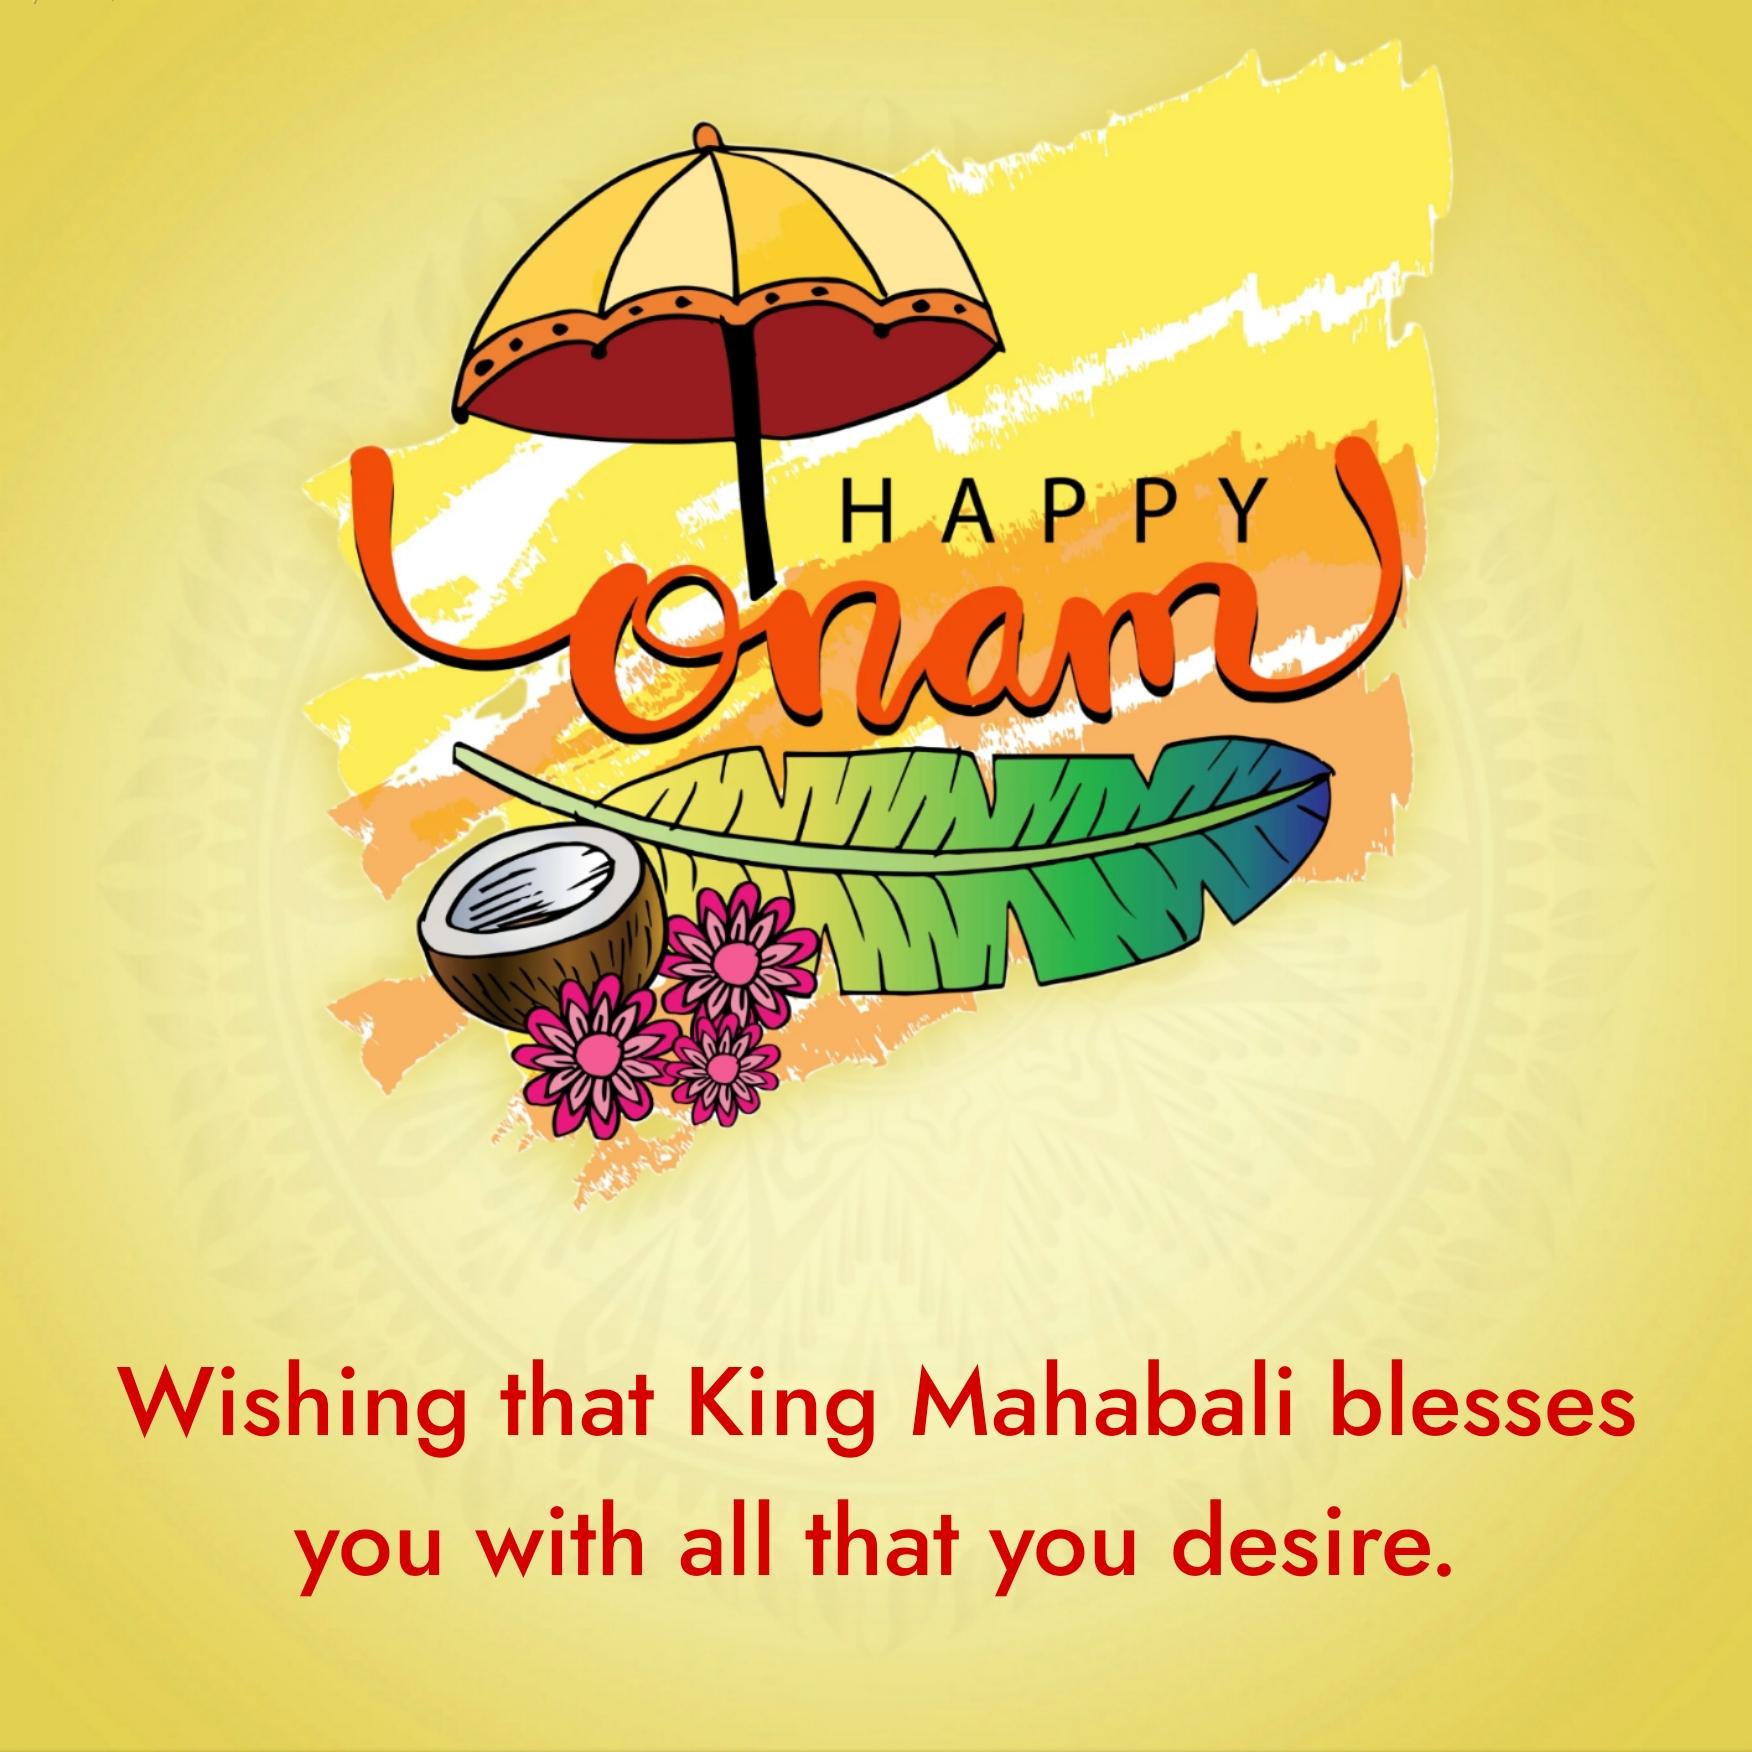 Wishing that King Mahabali blesses you with all that you desire